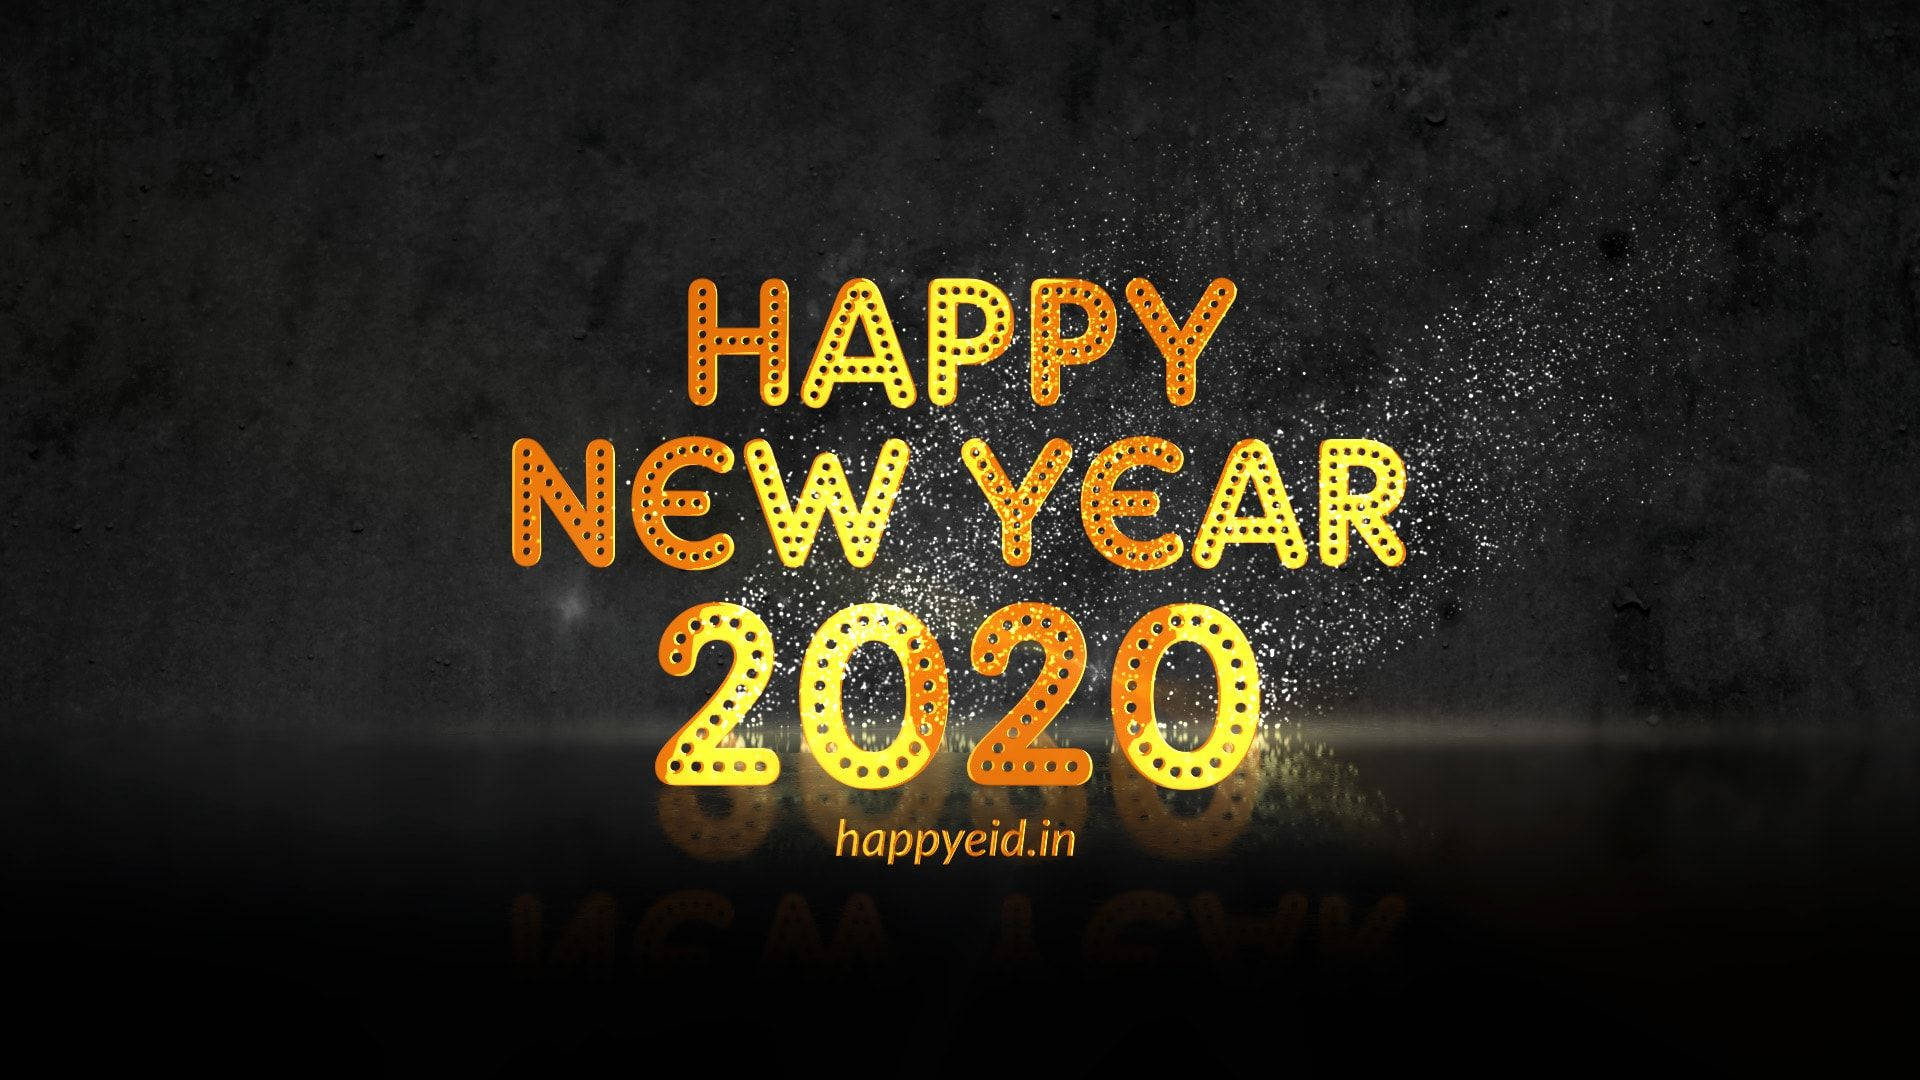 Happy New Year 2020, Wishing Everyone A Year Of Joy And Prosperity Wallpaper